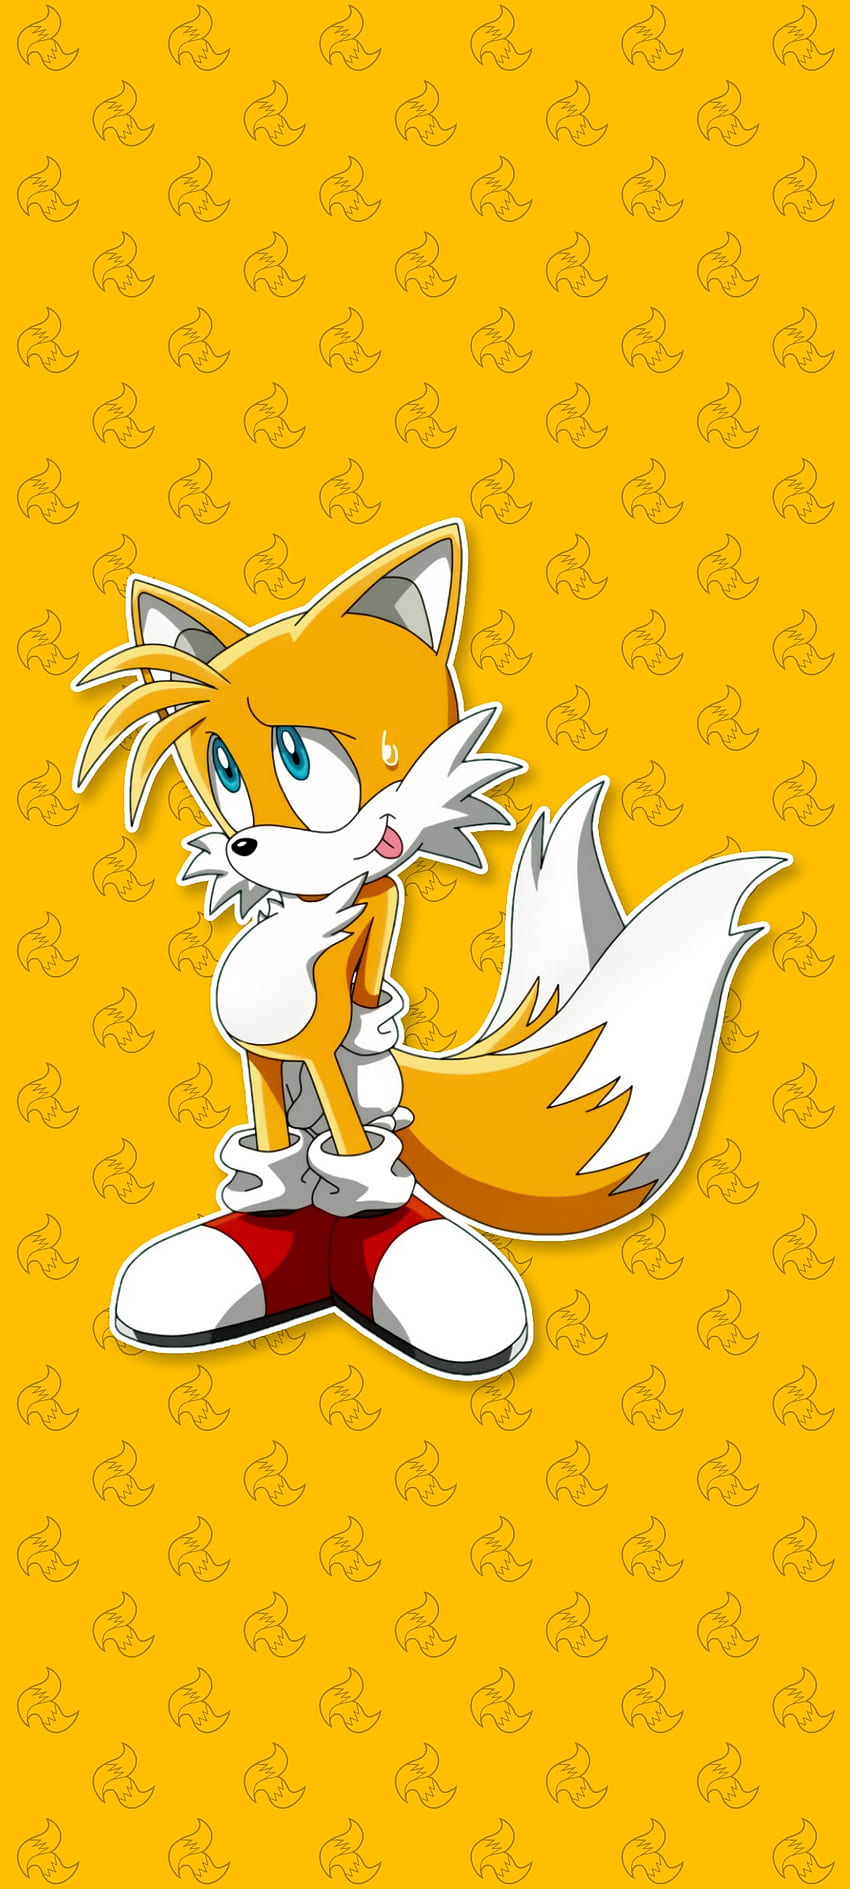 Tails Sonic X WallP, Sonic the Hedgehog, Miles Tails Prower, Tails the Fox, Tails Sonic HD-Handy-Hintergrundbild